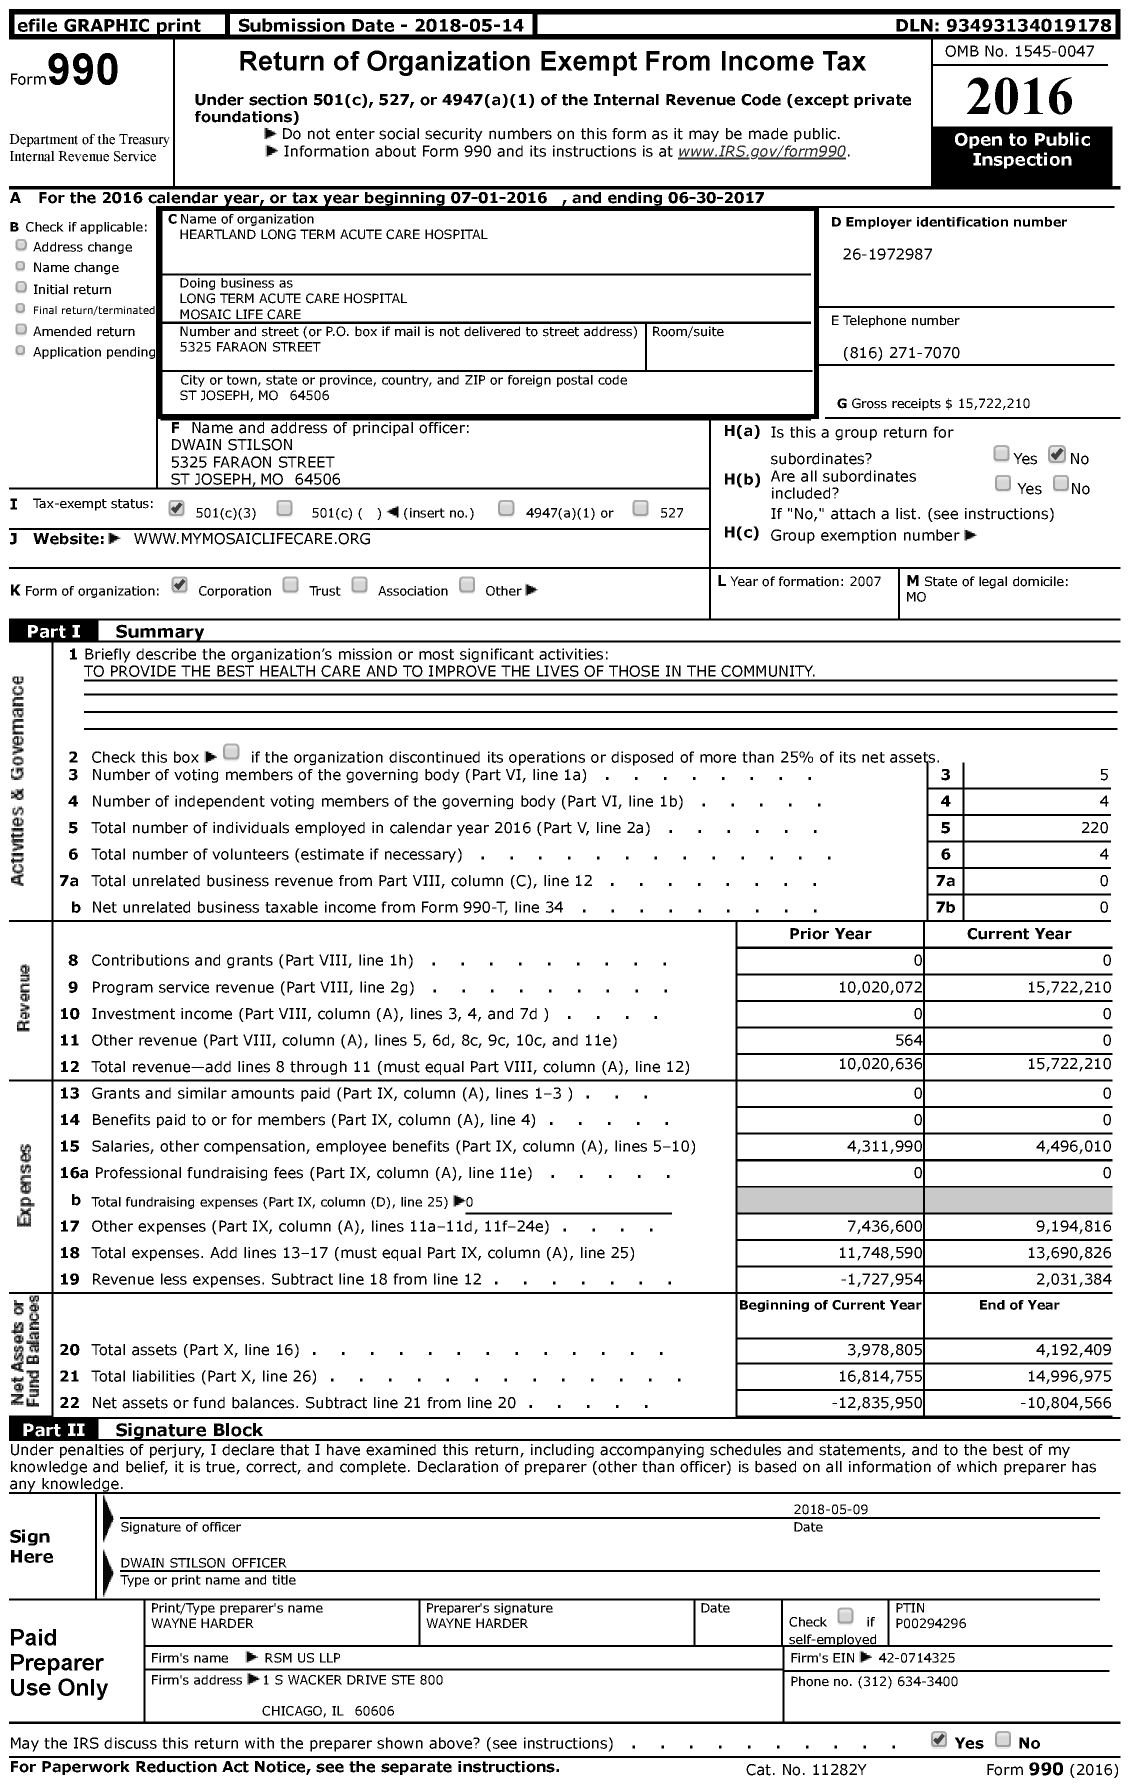 Image of first page of 2016 Form 990 for Heartland Long Term Acute Care Hospital (HLTACH)